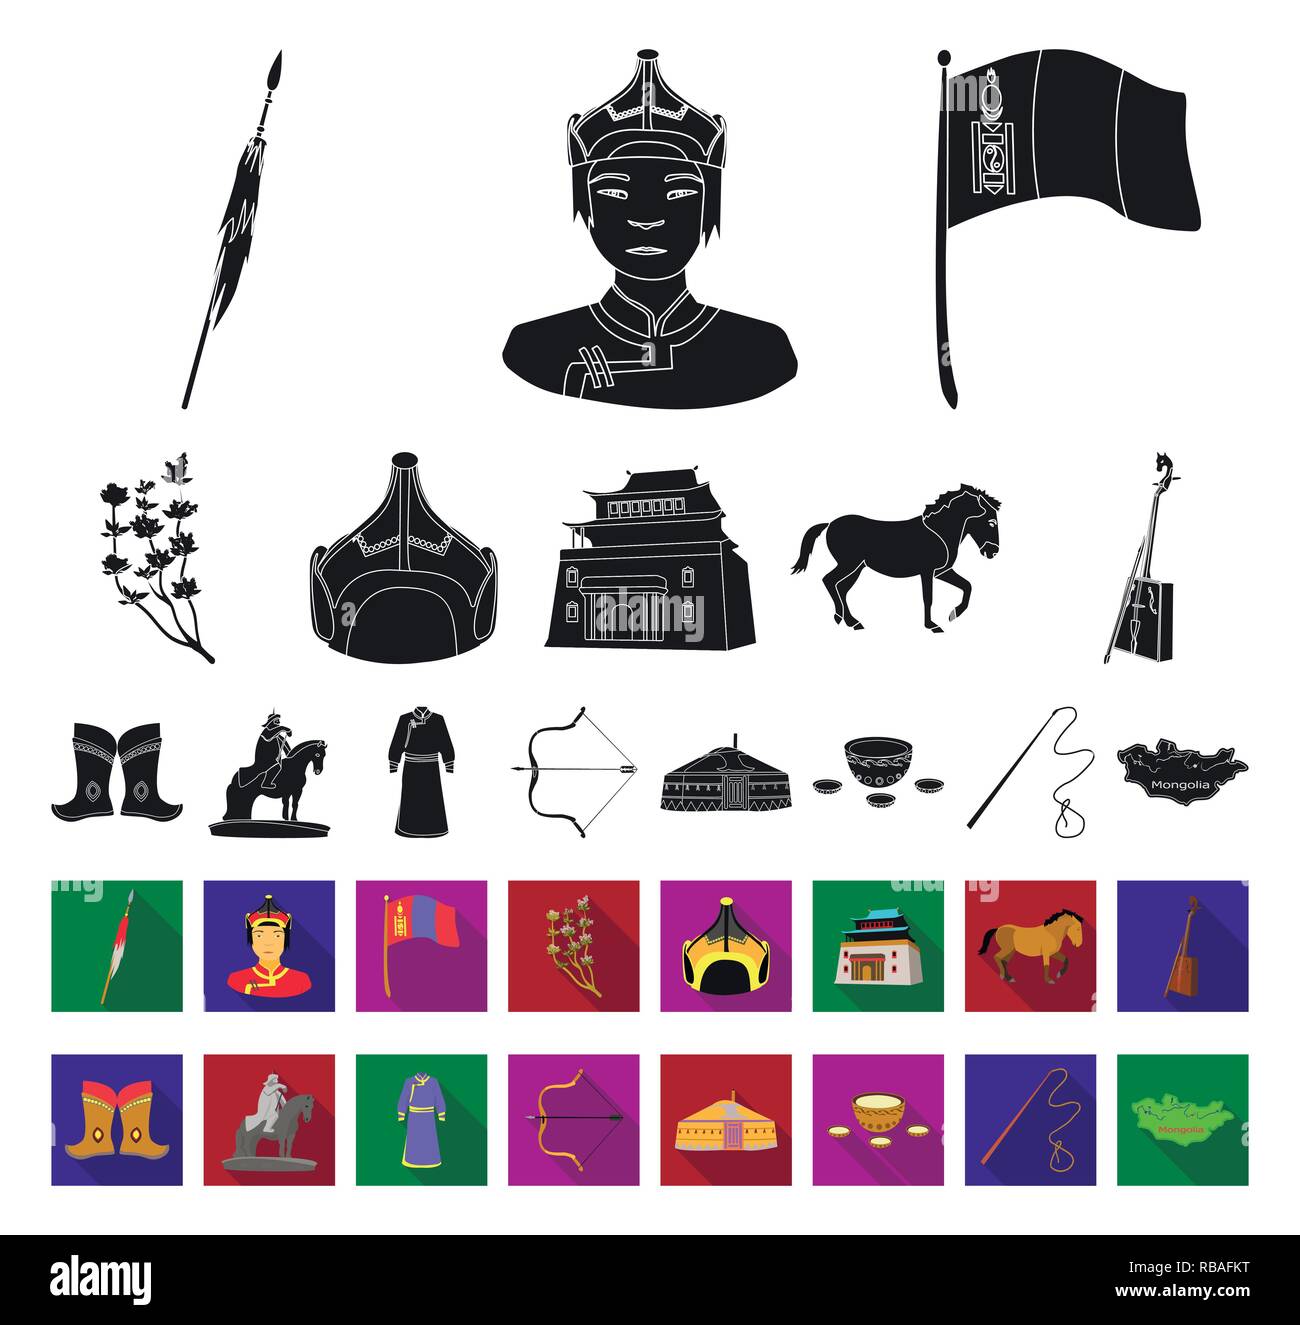 arms,arrow,belt,black,flat,bow,buddhism,building,cashmere,coat,collection,country,culture,flag,flower,fur,genghis,gutuly,headdress,horse,hudak,icon,illustration,instrument,khan,kialis,kumis,landmark,leather,map,monastery,mongol,mongolia,monument,musical,nature,religion,robe,set,shoes,sign,spear,temple,territory,tradition,travel,vector,whip,wool,yurt Vector Vectors , Stock Vector